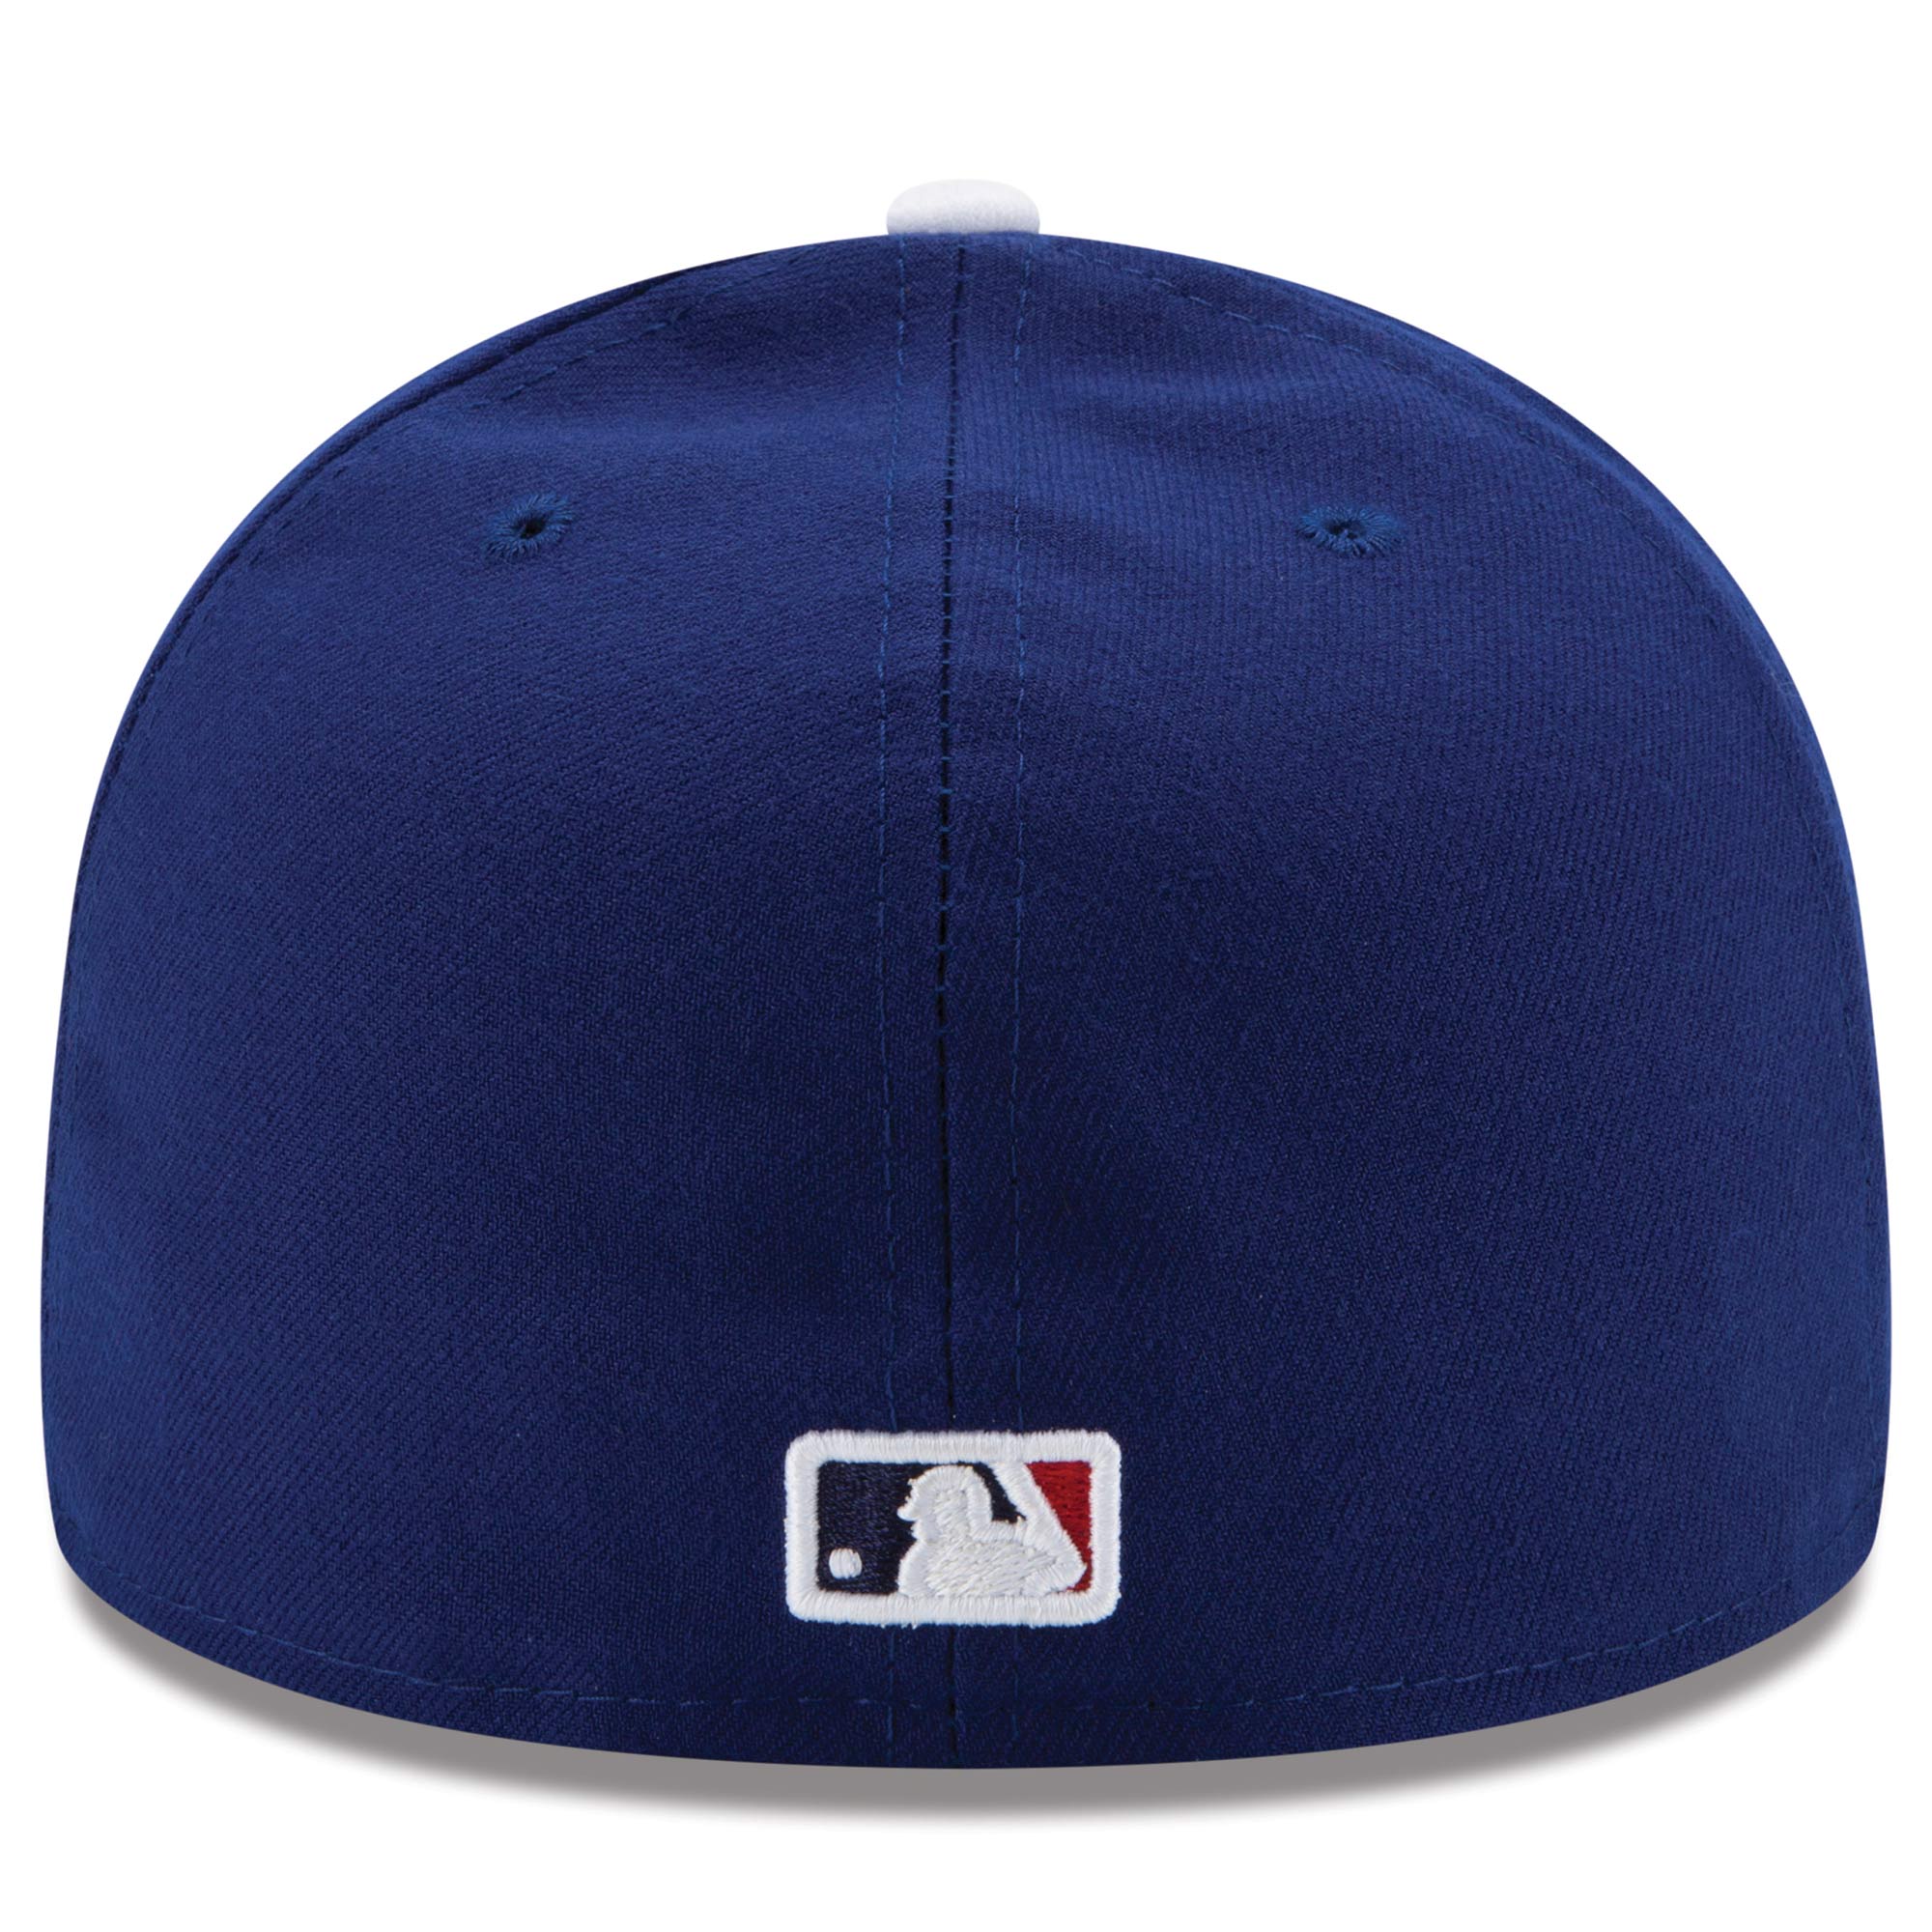 Men's New Era Royal Los Angeles Dodgers Authentic Collection On Field 59FIFTY Performance Fitted Hat - image 4 of 5